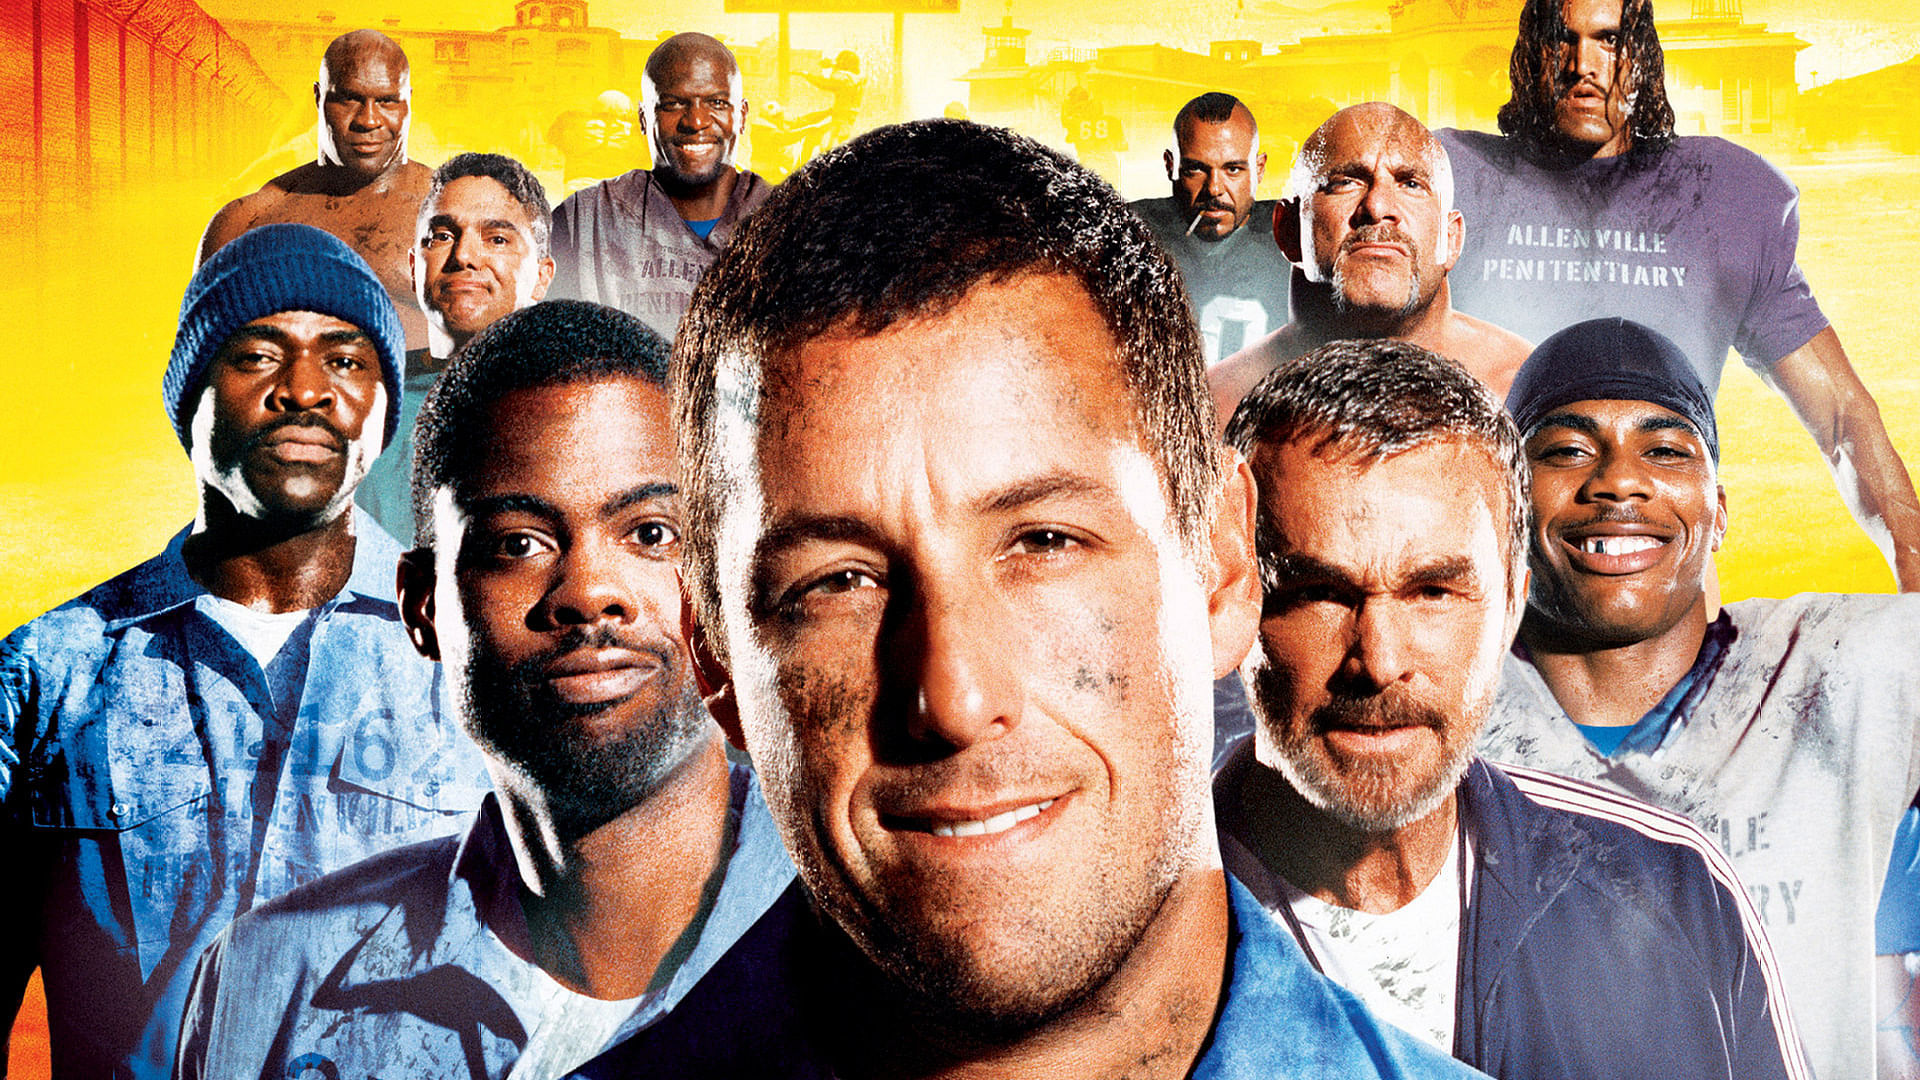 Top 10 American football movies of all time